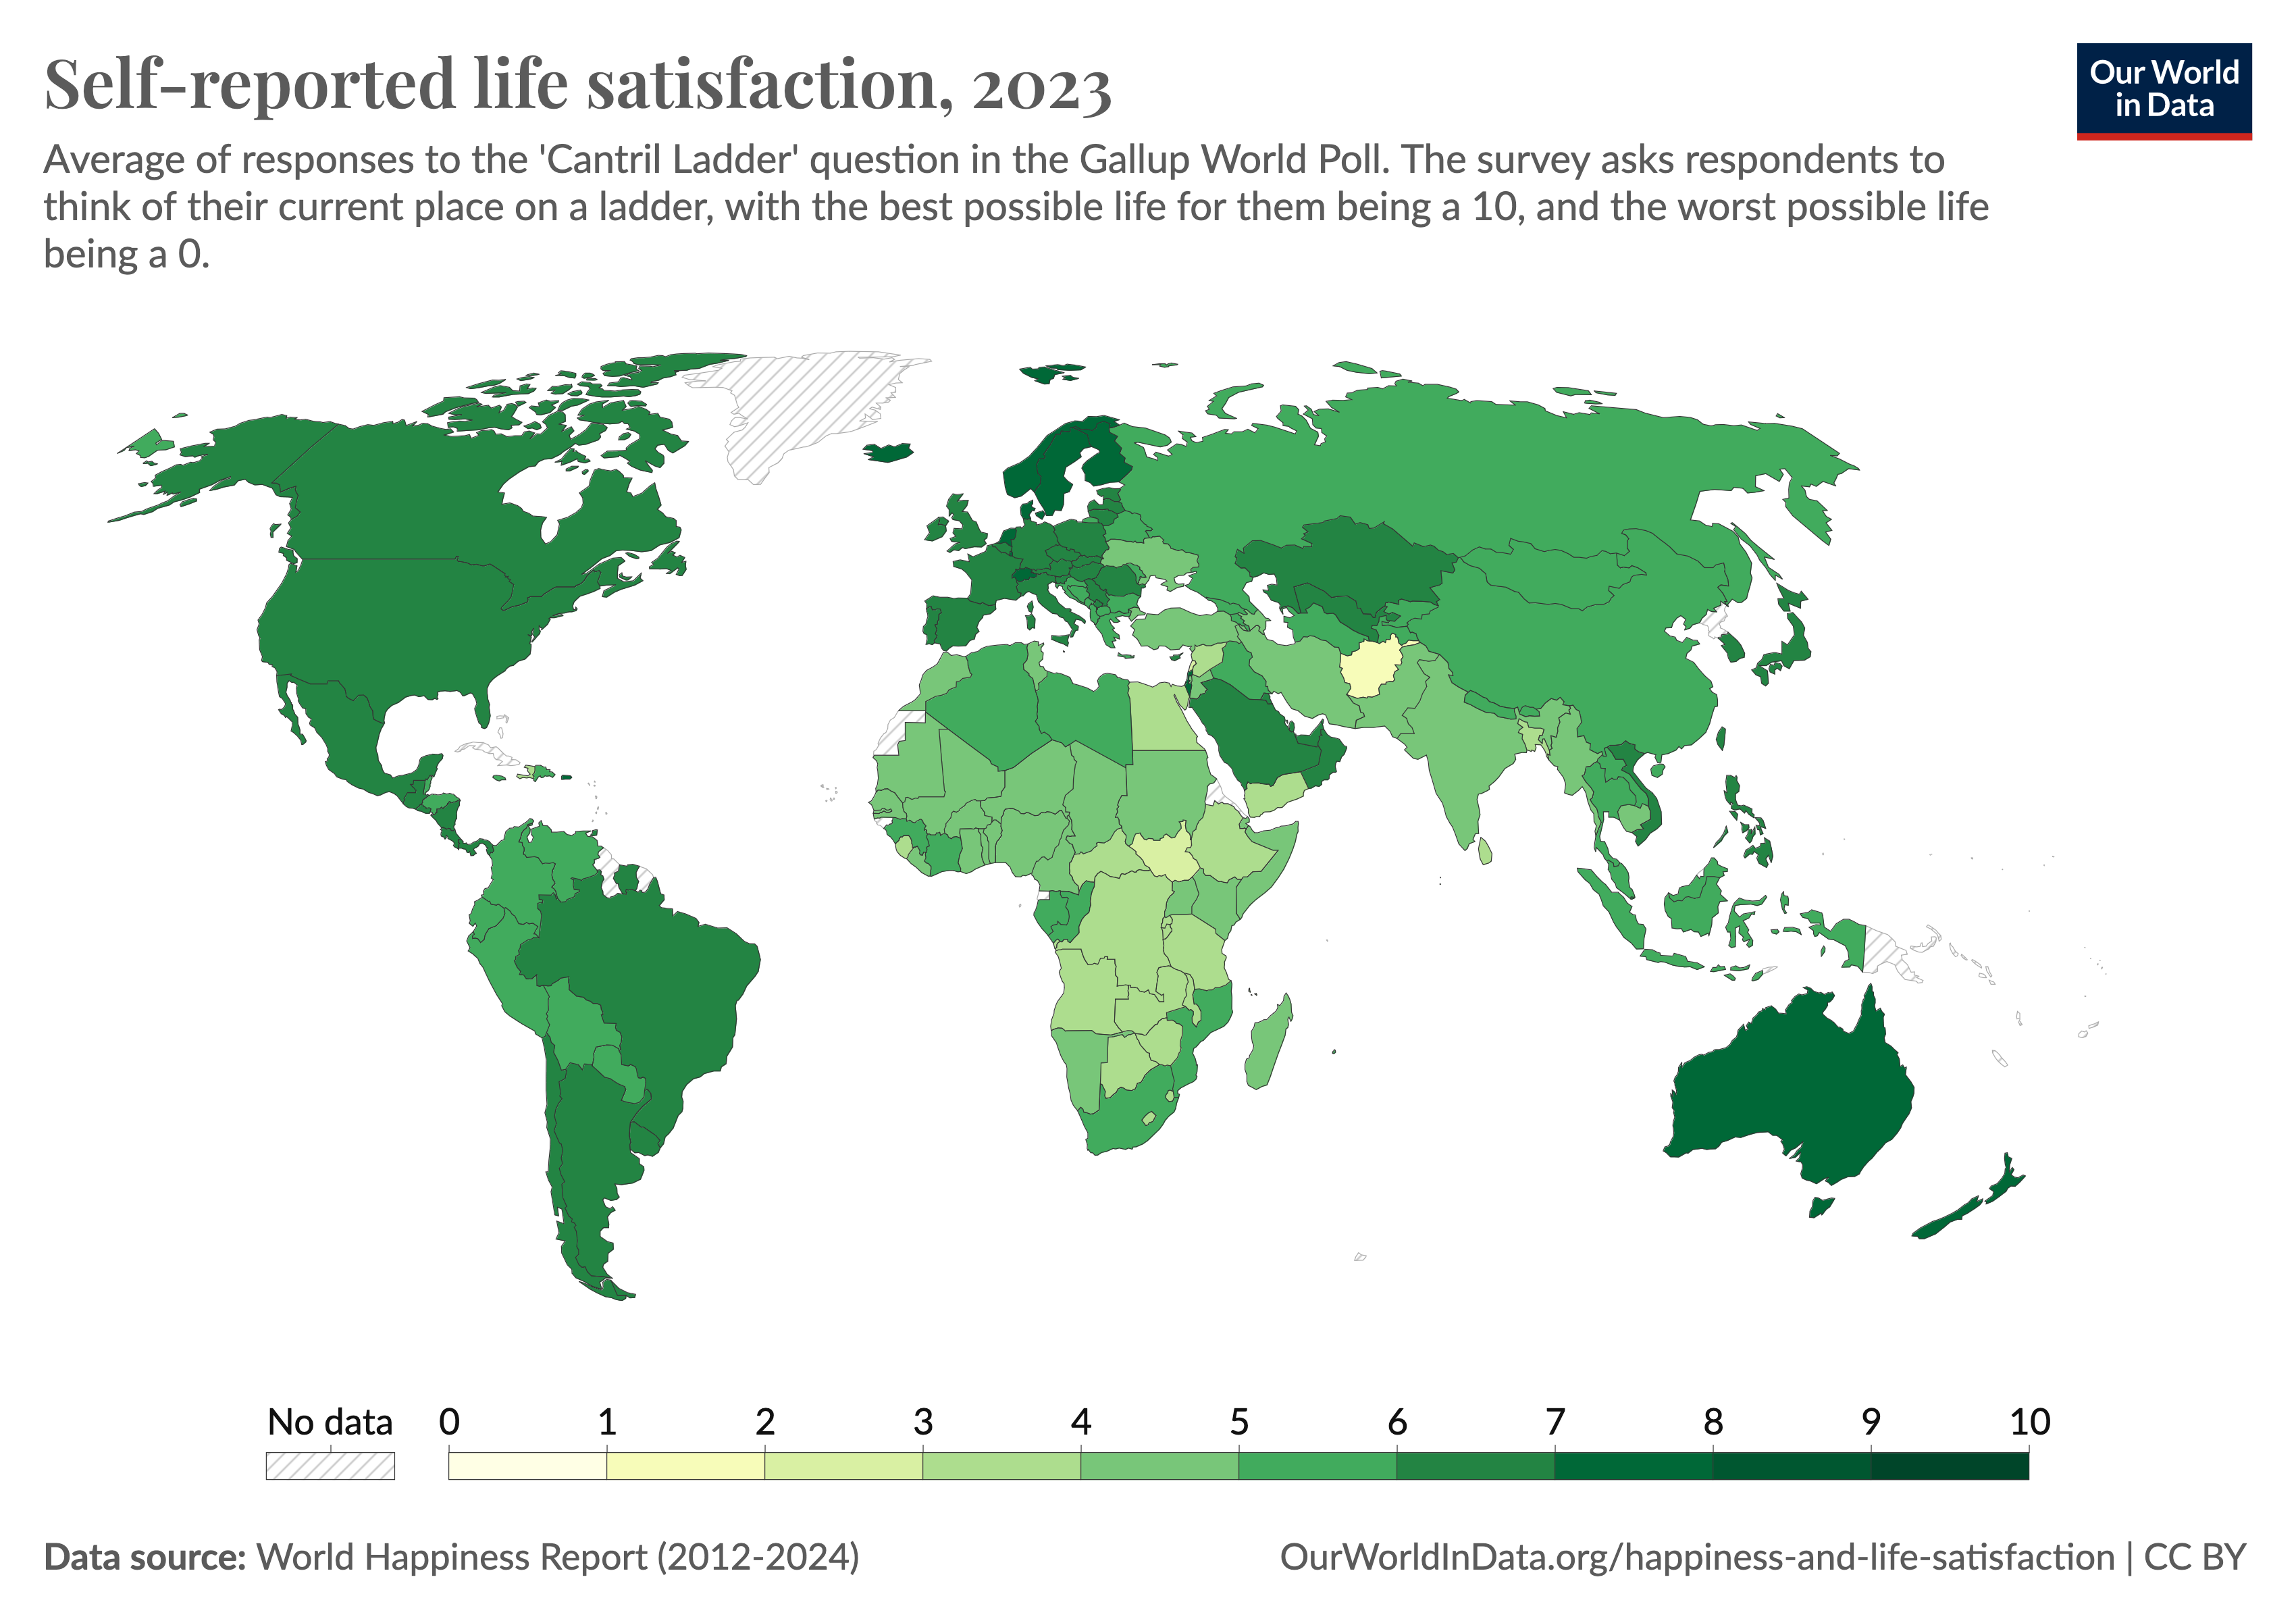 A world map indicating self-reported life satisfaction for each country. Darker shades of green show higher life satisfaction in, e.g., Europe, Australia, North America, Saudi Arabia, and Brazil. Lighter shades show lower life satisfaction in, e.g., Afghanistan, India, Pakistan, and many African countries.